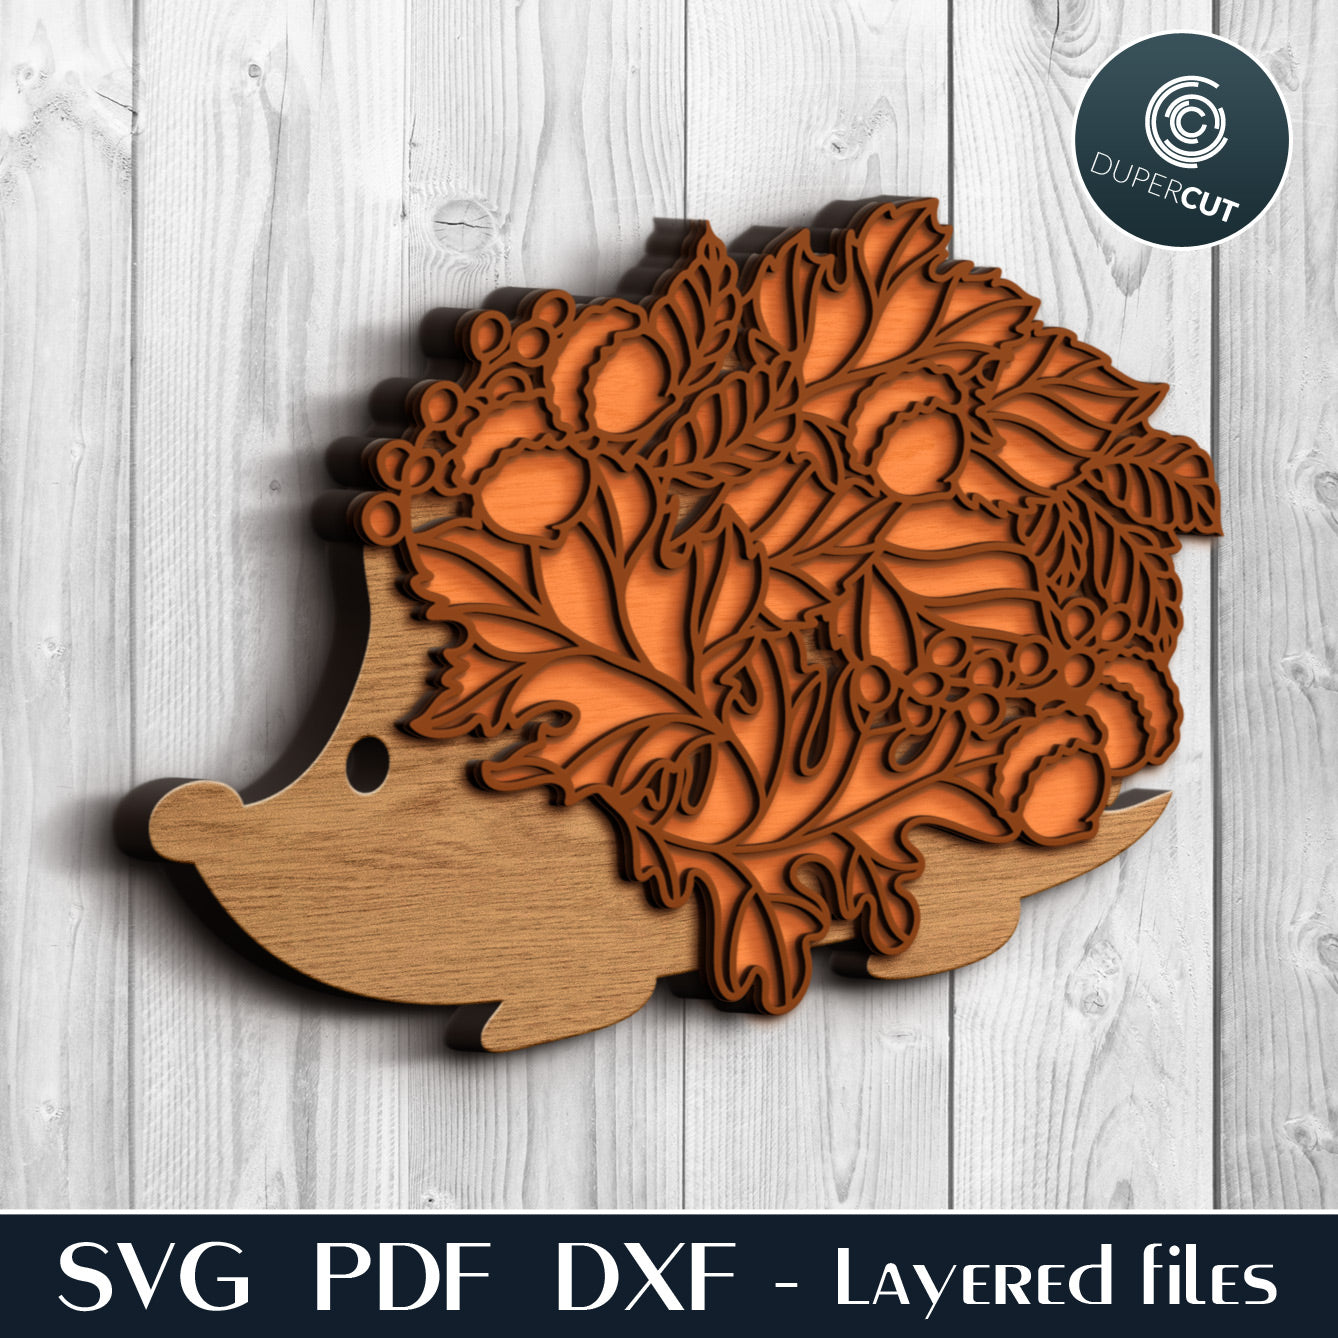 Hedgehog with leaves and acorns - layered cut files SVG PDF DXF template for Glowforge, Cricut, Silhouette cameo, CNC plasma machines